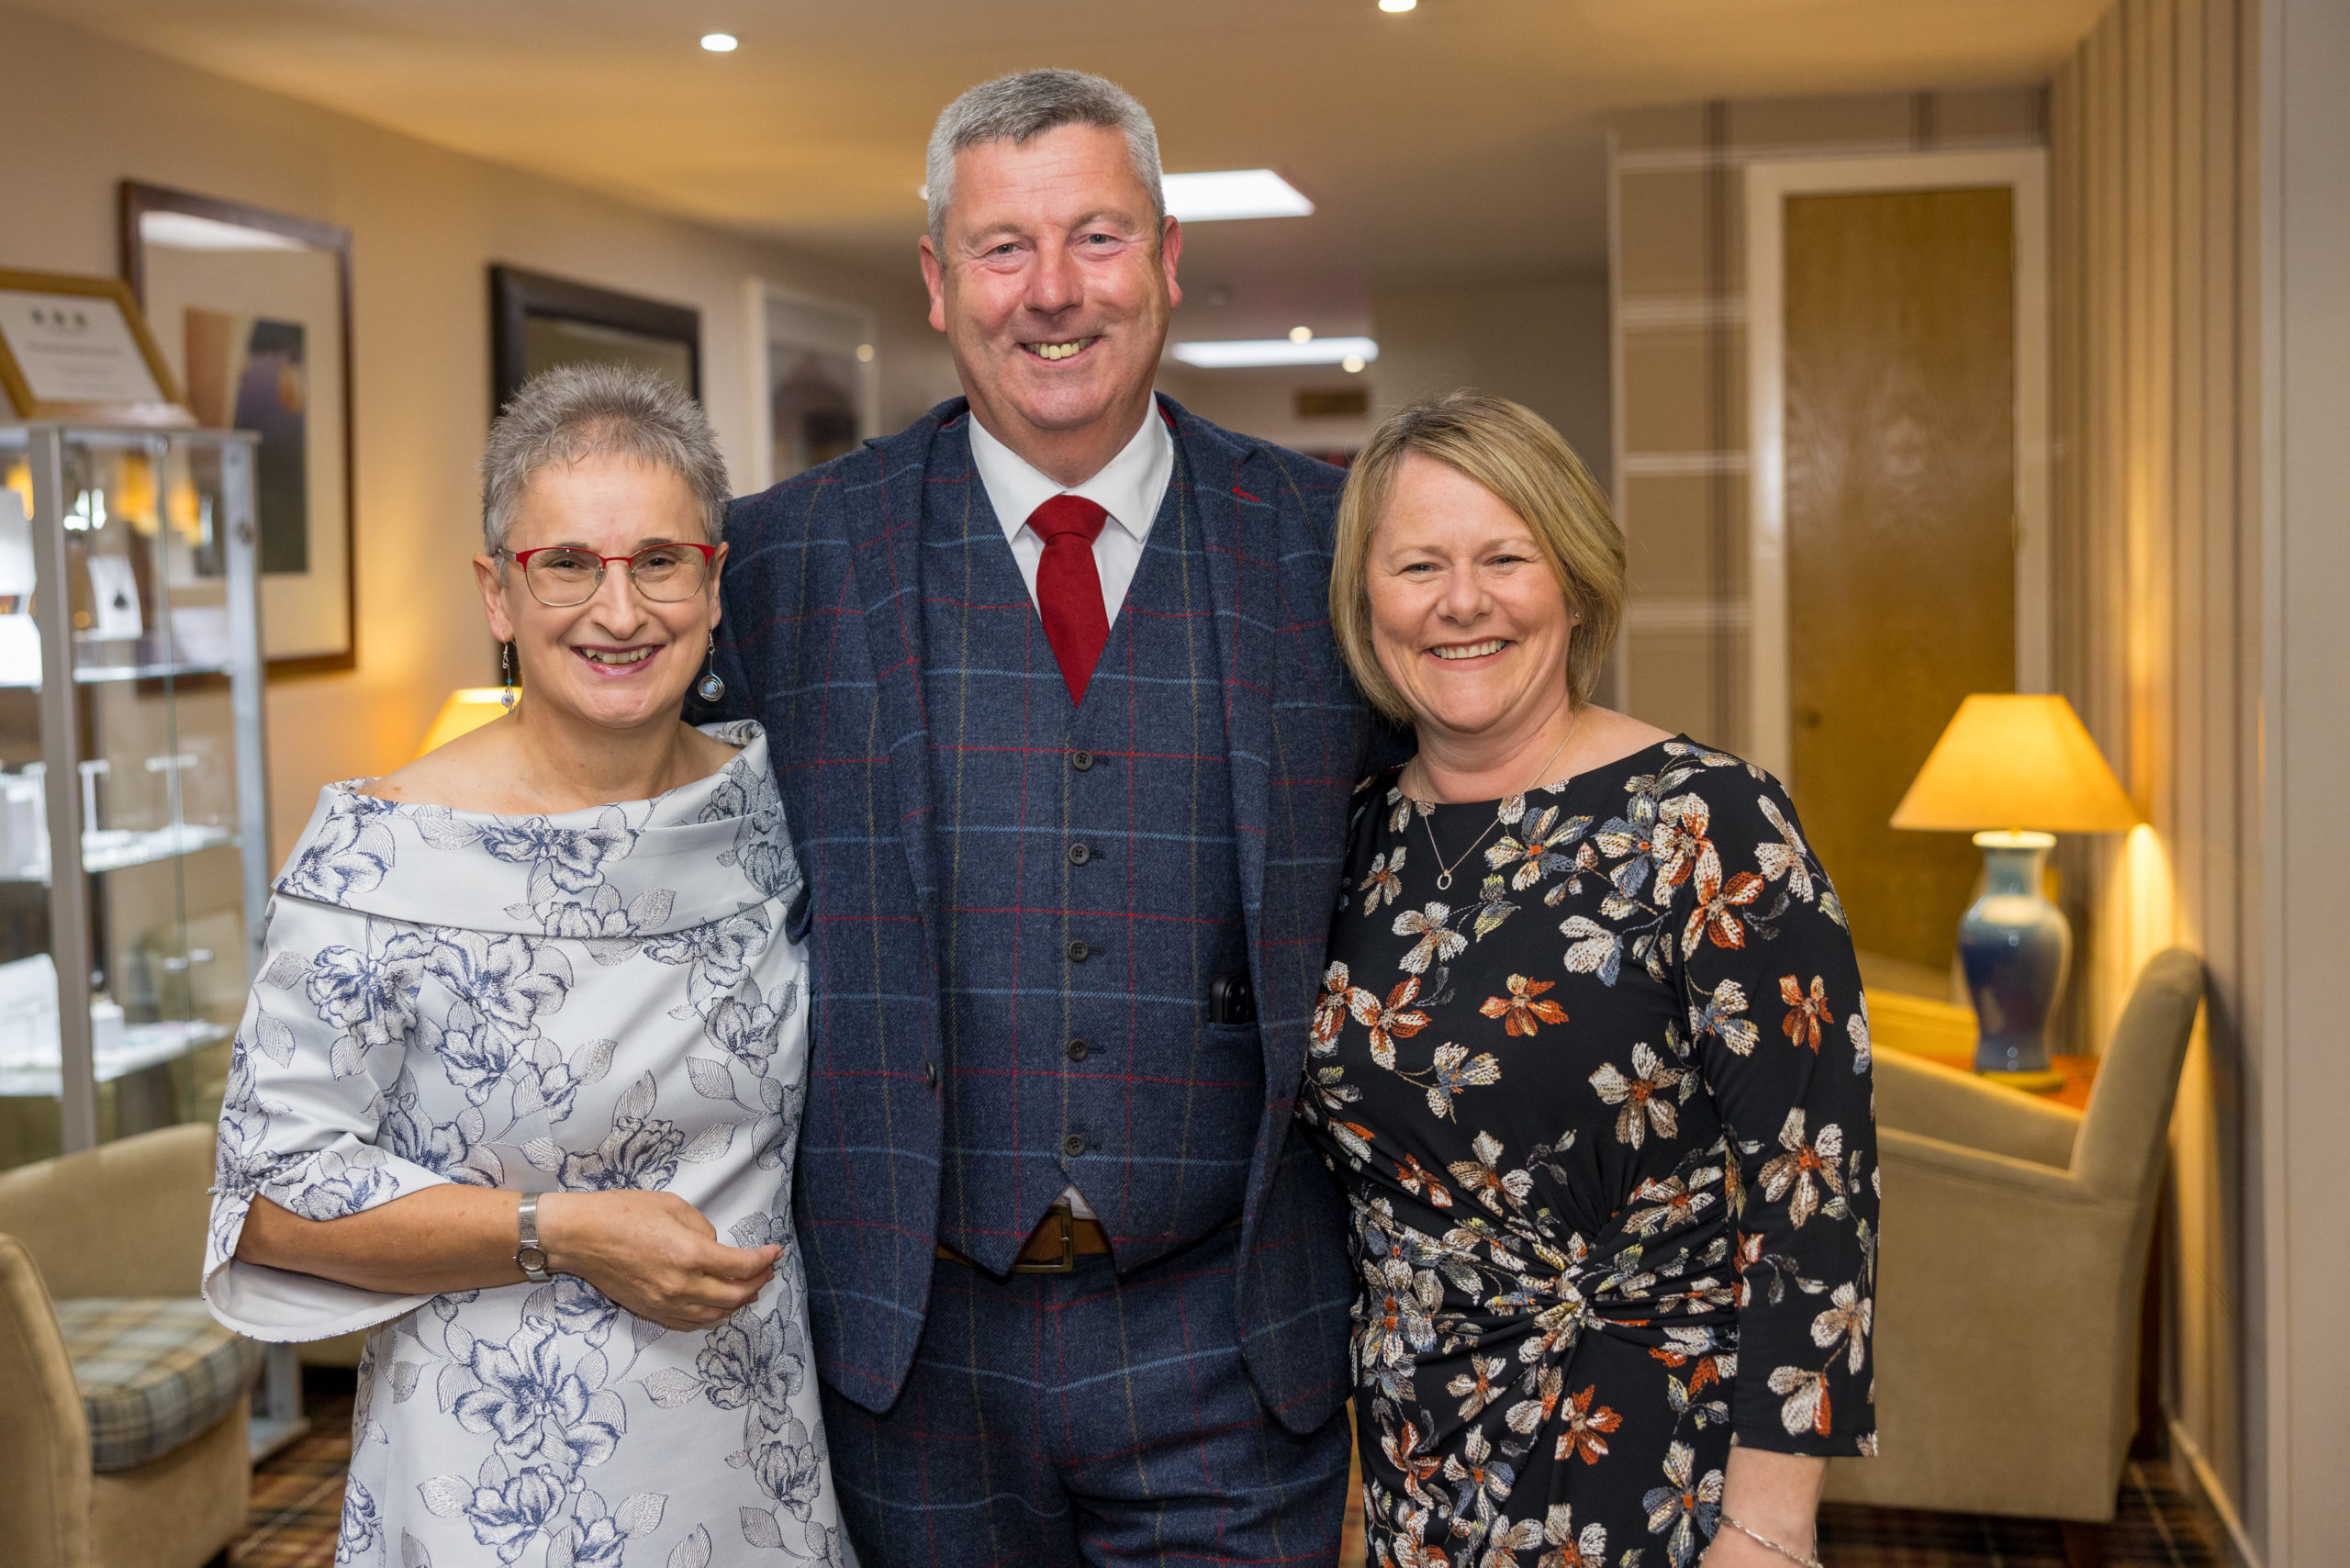 Caithness Chamber of Commerce 49th Annual Dinner and Awards Ceremony